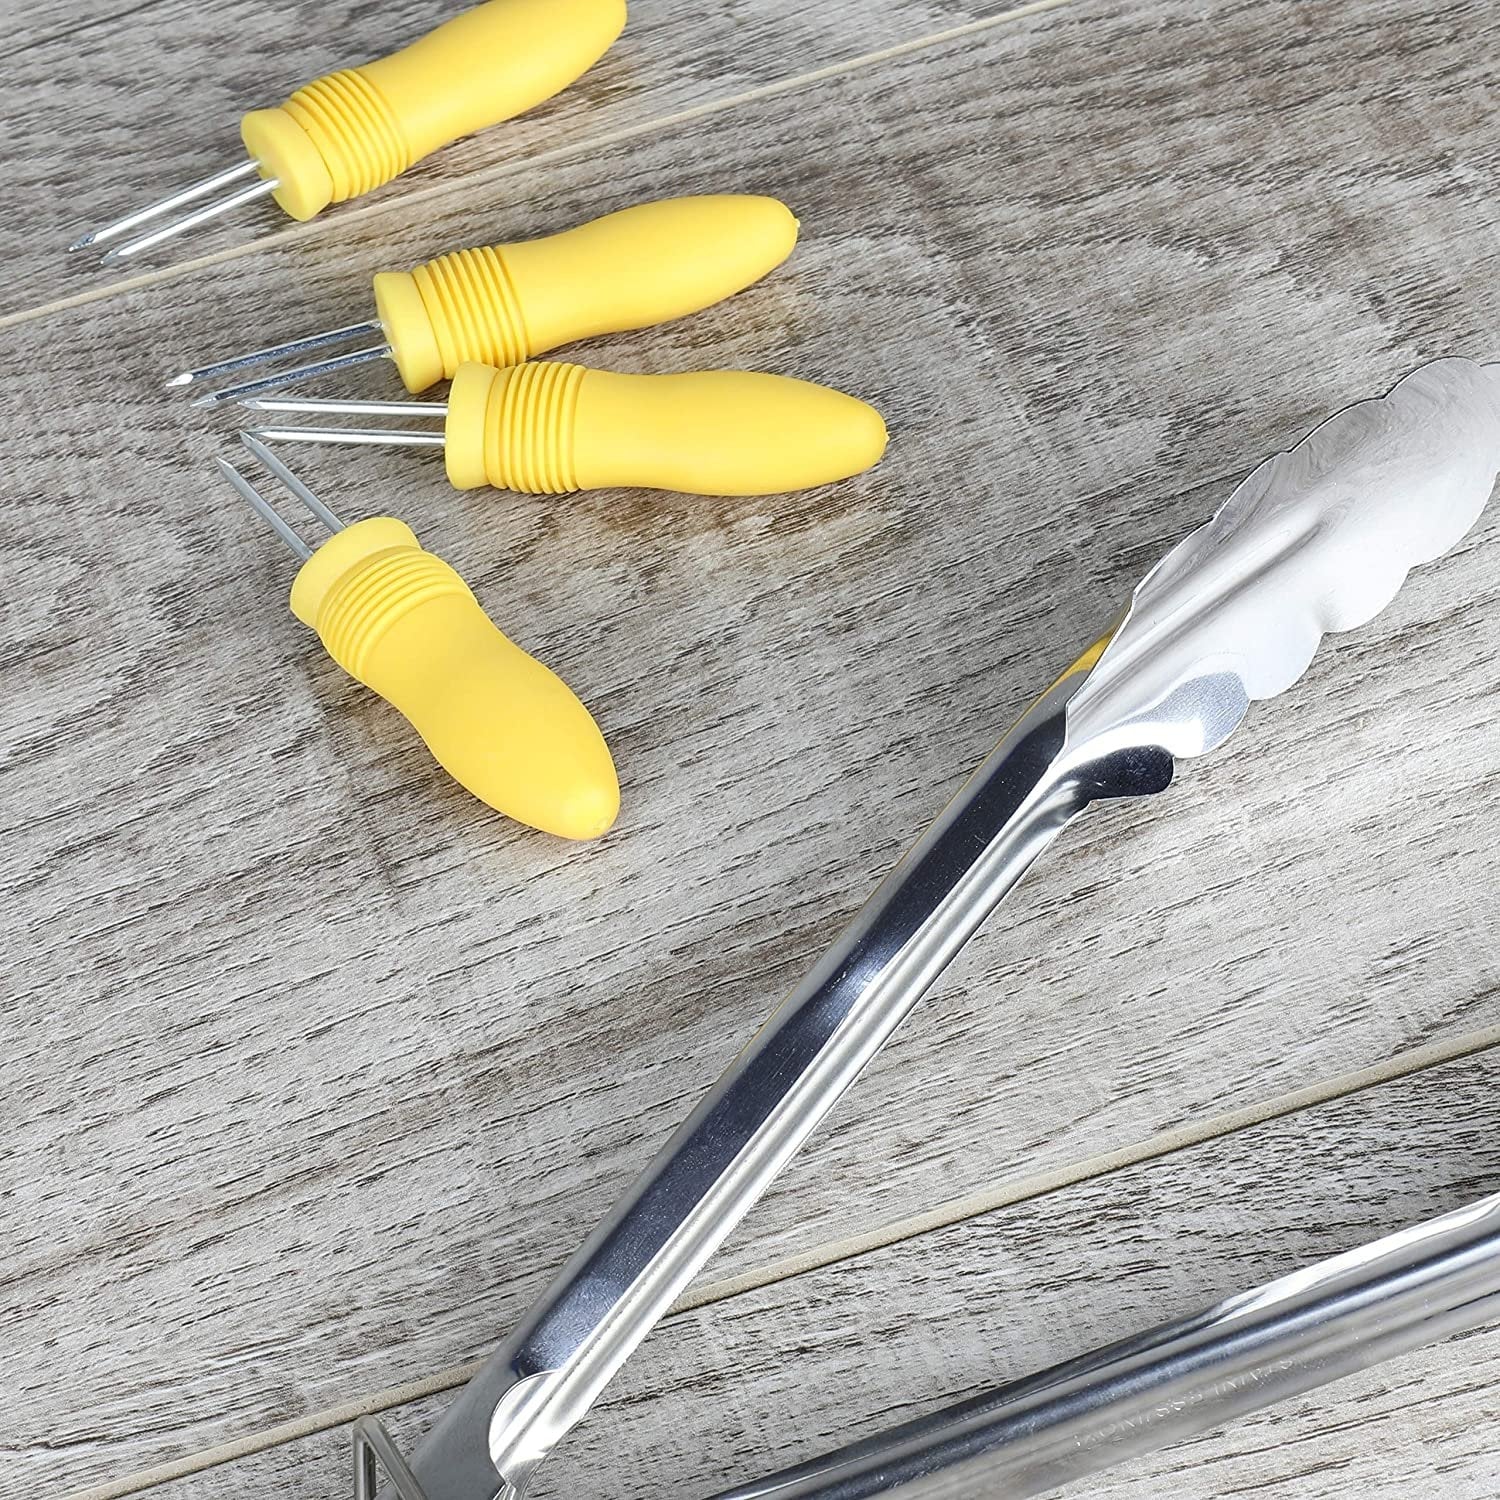 https://ak1.ostkcdn.com/images/products/is/images/direct/59bc3eb92133d8250f1579b32a5d89b62c56c830/Chef-Craft-6pc-Corn-Cob-Utensil-Set---Includes-2-Corn-Dishes-%26-4-Corn-Cob-Holders.jpg